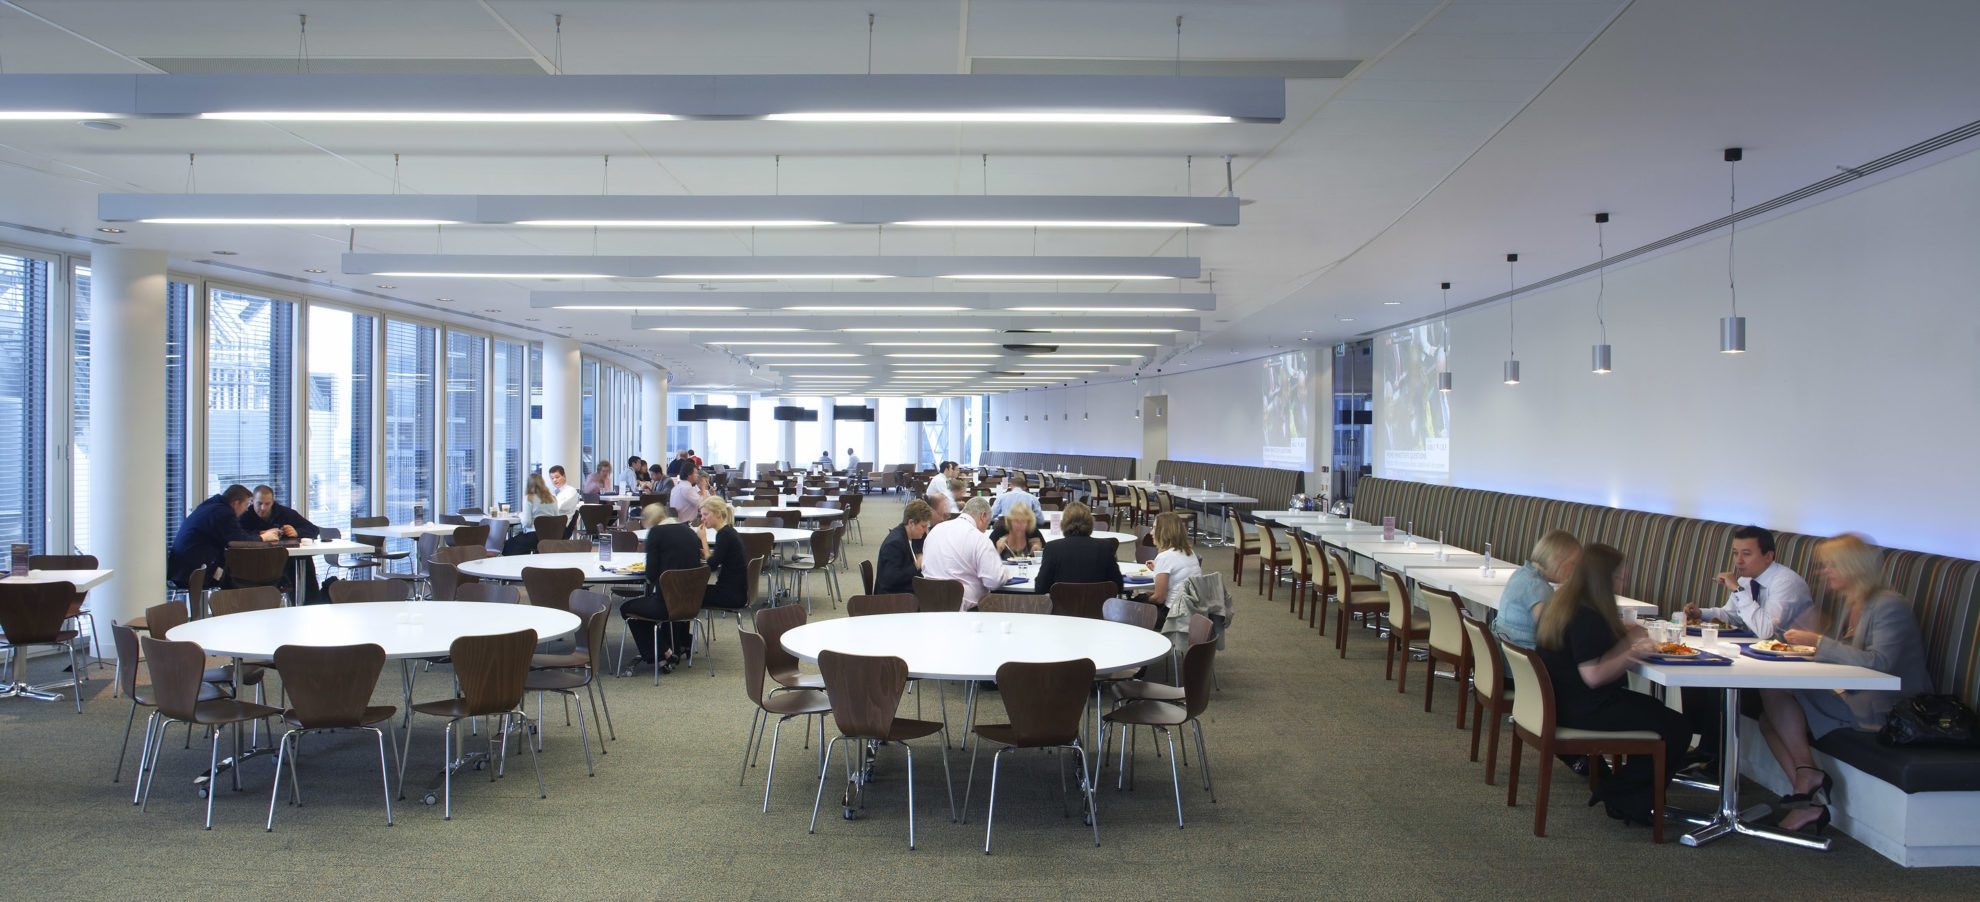 Willis dining hall fit out